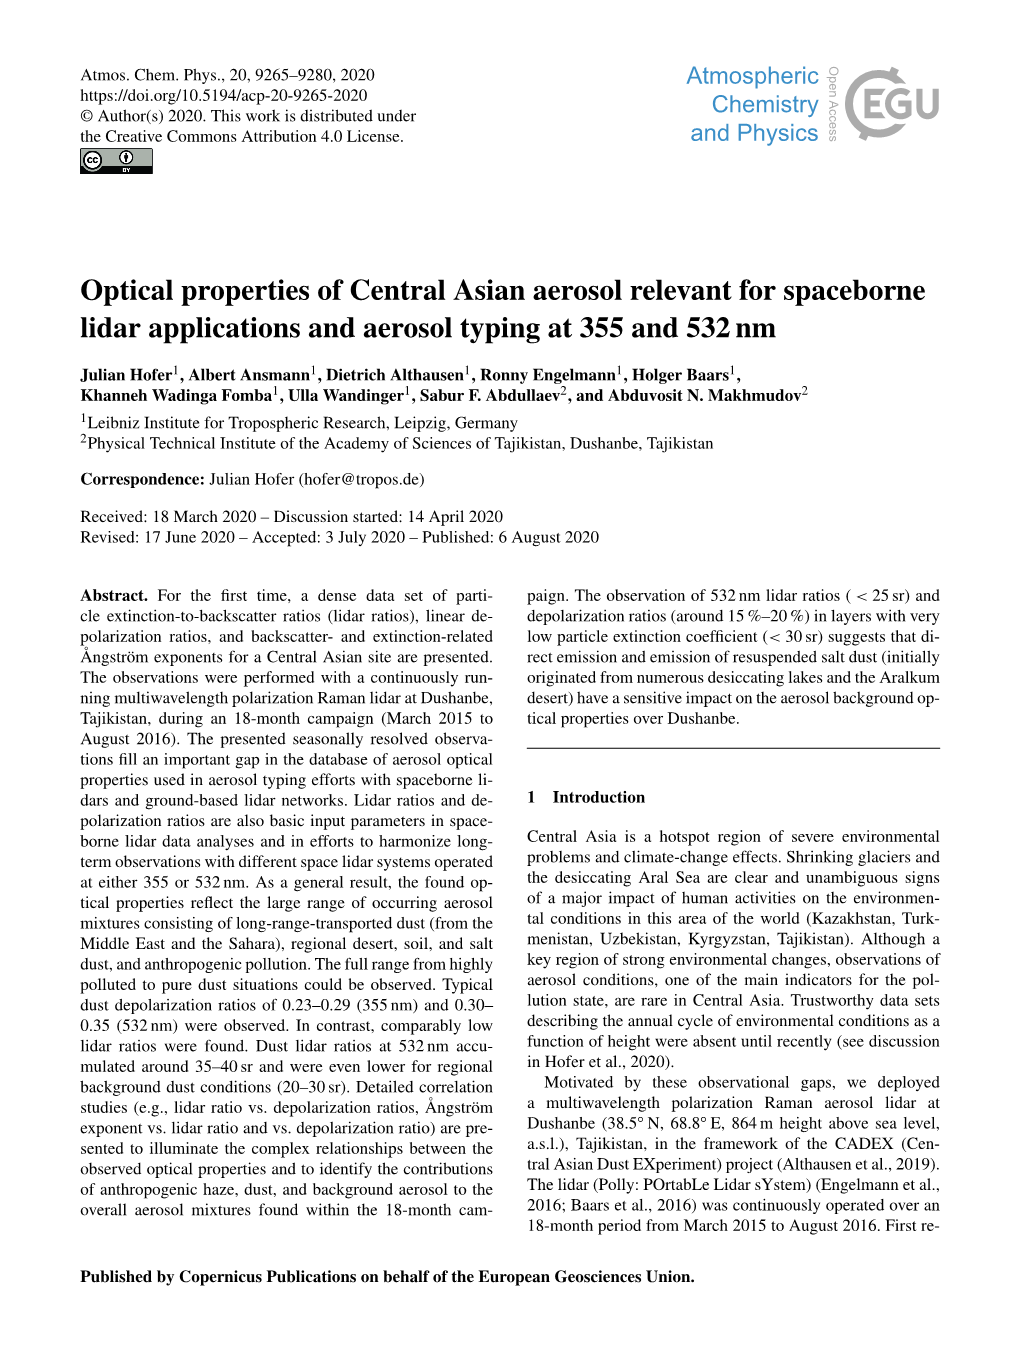 Optical Properties of Central Asian Aerosol Relevant for Spaceborne Lidar Applications and Aerosol Typing at 355 and 532 Nm